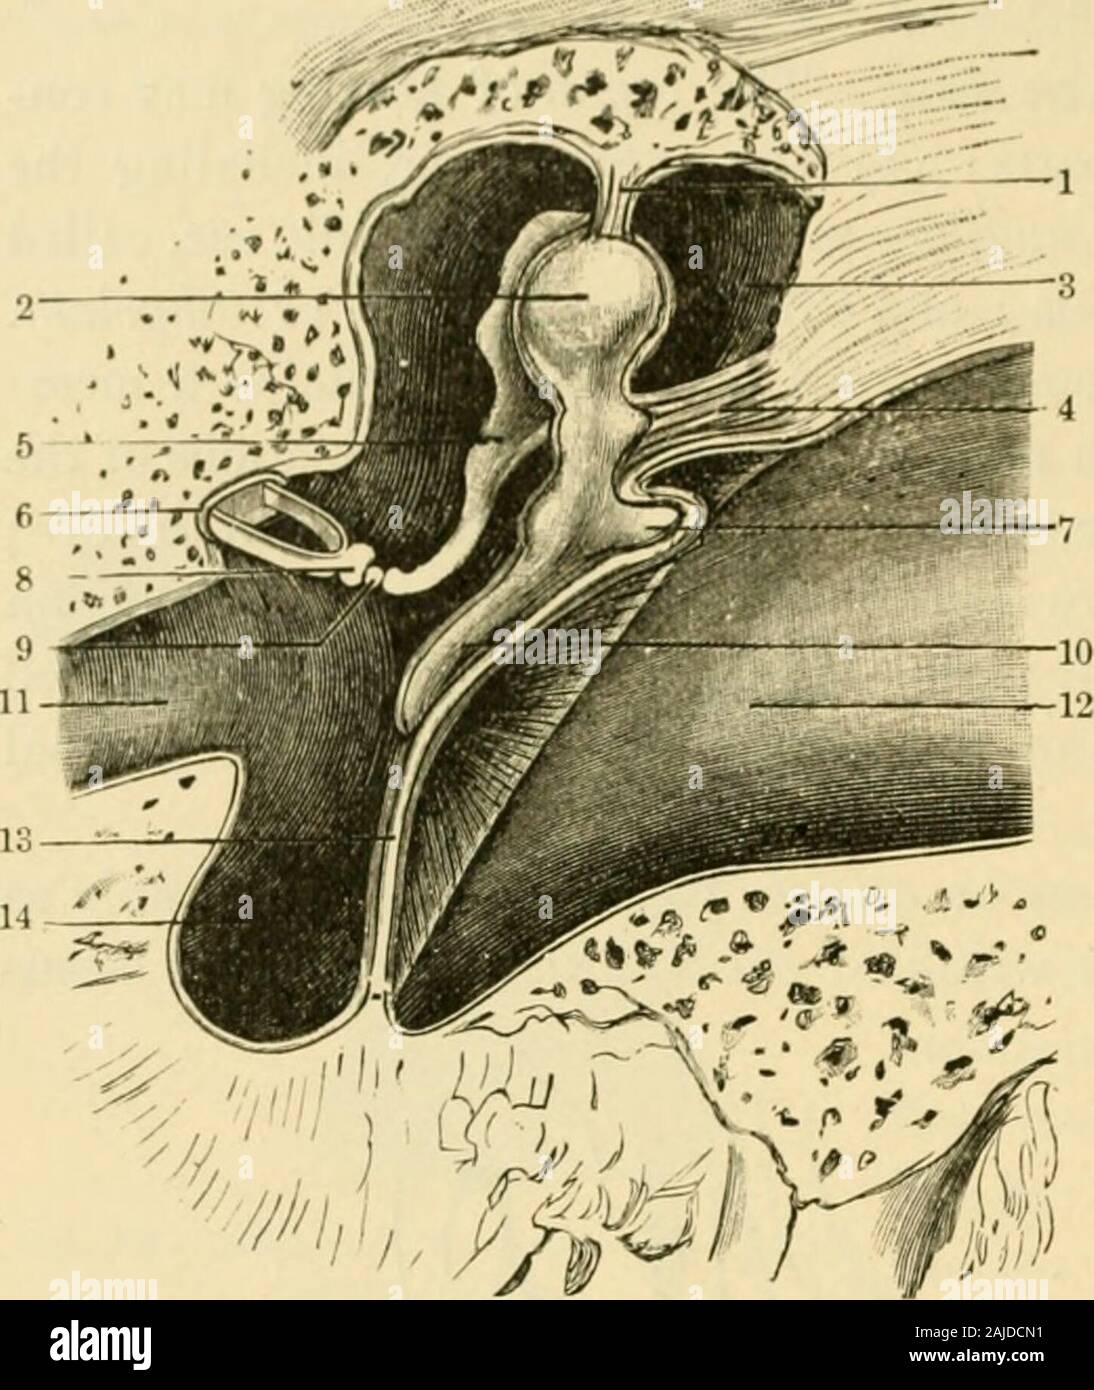 An American text-book of physiology . be; 5, meatus internus, containing the facial (uppermost) and auditory nerves;6 placed on the vestibule of the labyrinth above the fenestra ovalis; a, apex of the petrous bone; 6,internal carotid artery; c, styloid process; d, facial nerve, issuing from the stylo-mastoid foramen; e,mastoid process ; /, squamous part of the bone. tially of yellow elastic cartilage covered with skin, and forming at the entranceof the auditory meatus a cup-shaped depression called the concha. 17?e concha, and to some extent the whole auricle, serves a useful purposein collect Stock Photo